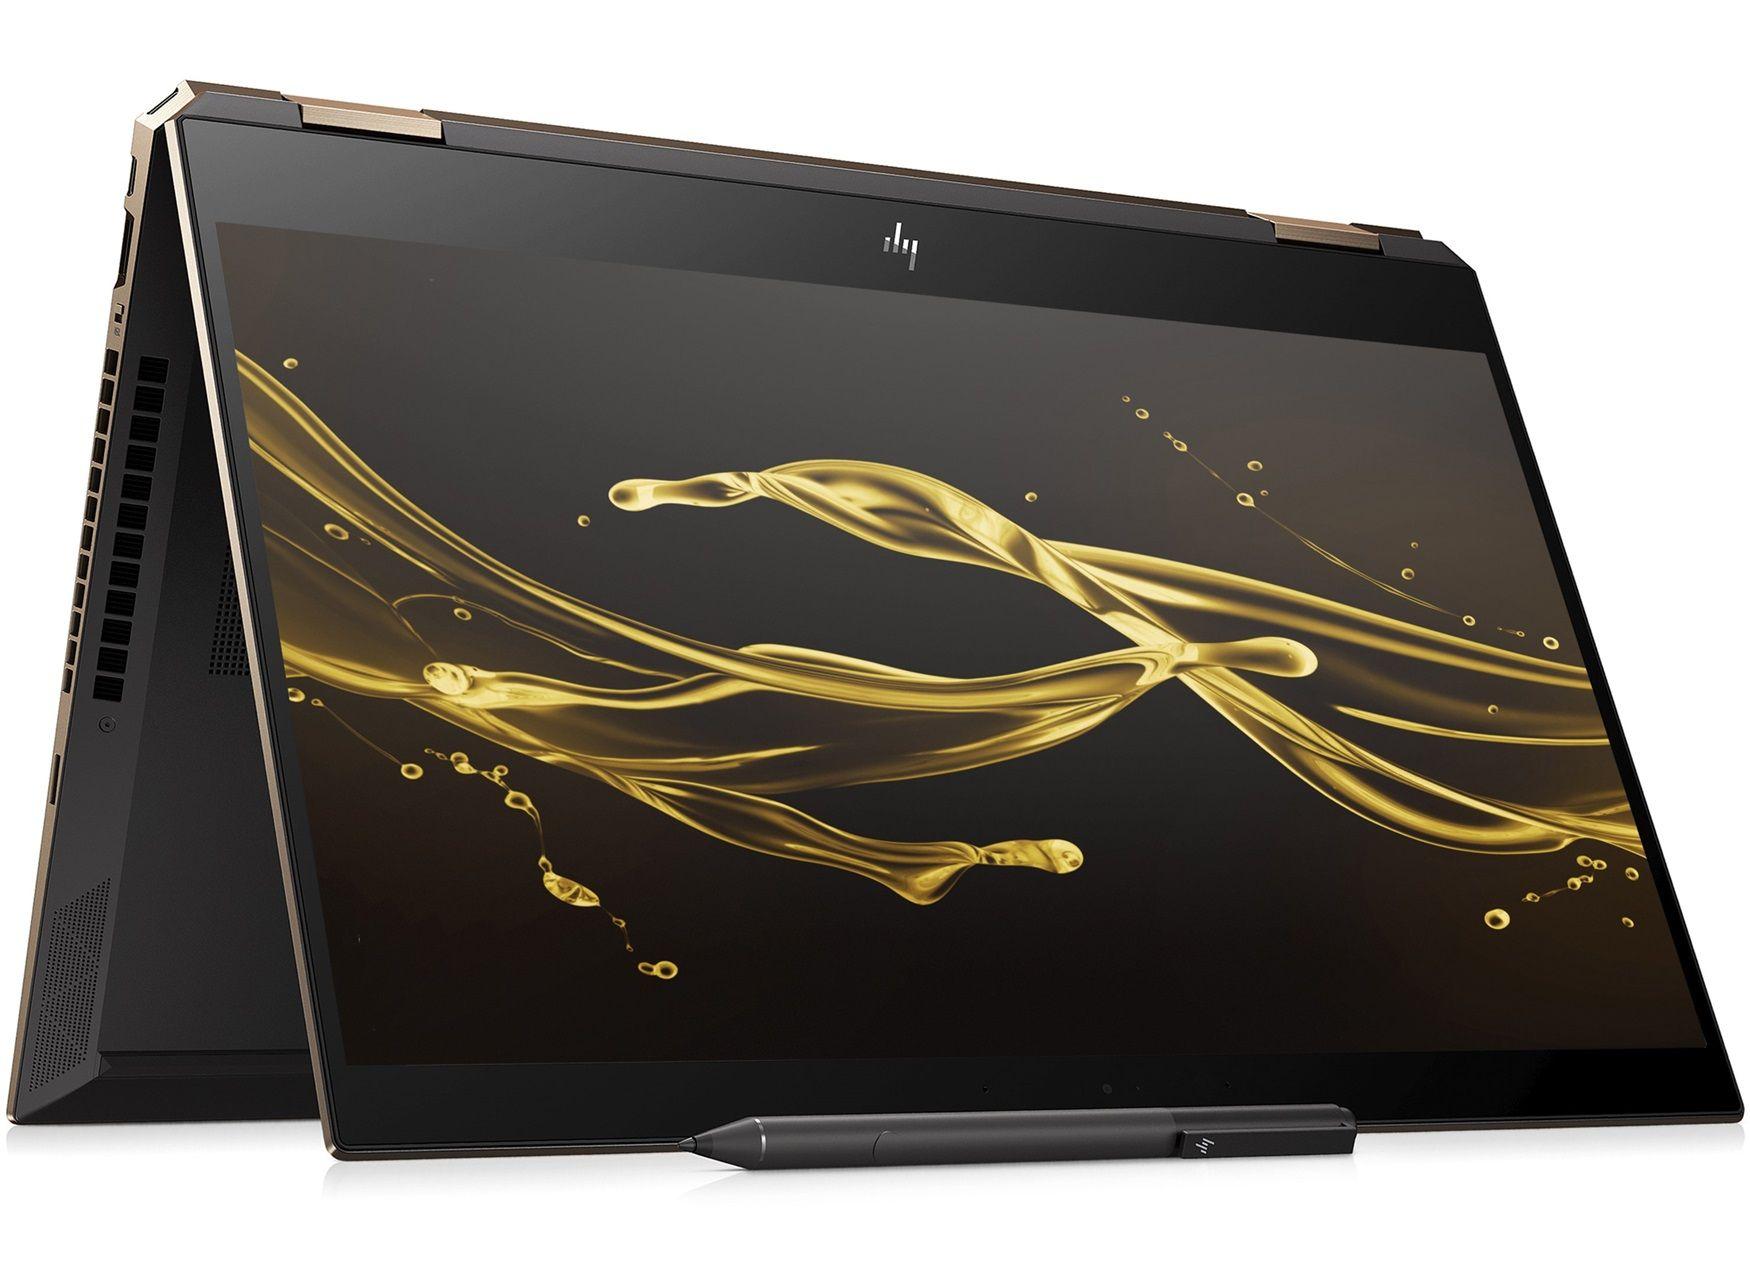 HP Laptop with Lighted Logo - HP Spectre x360 2019 Edition 15-df0002na 4K Convertible Laptop - HP ...